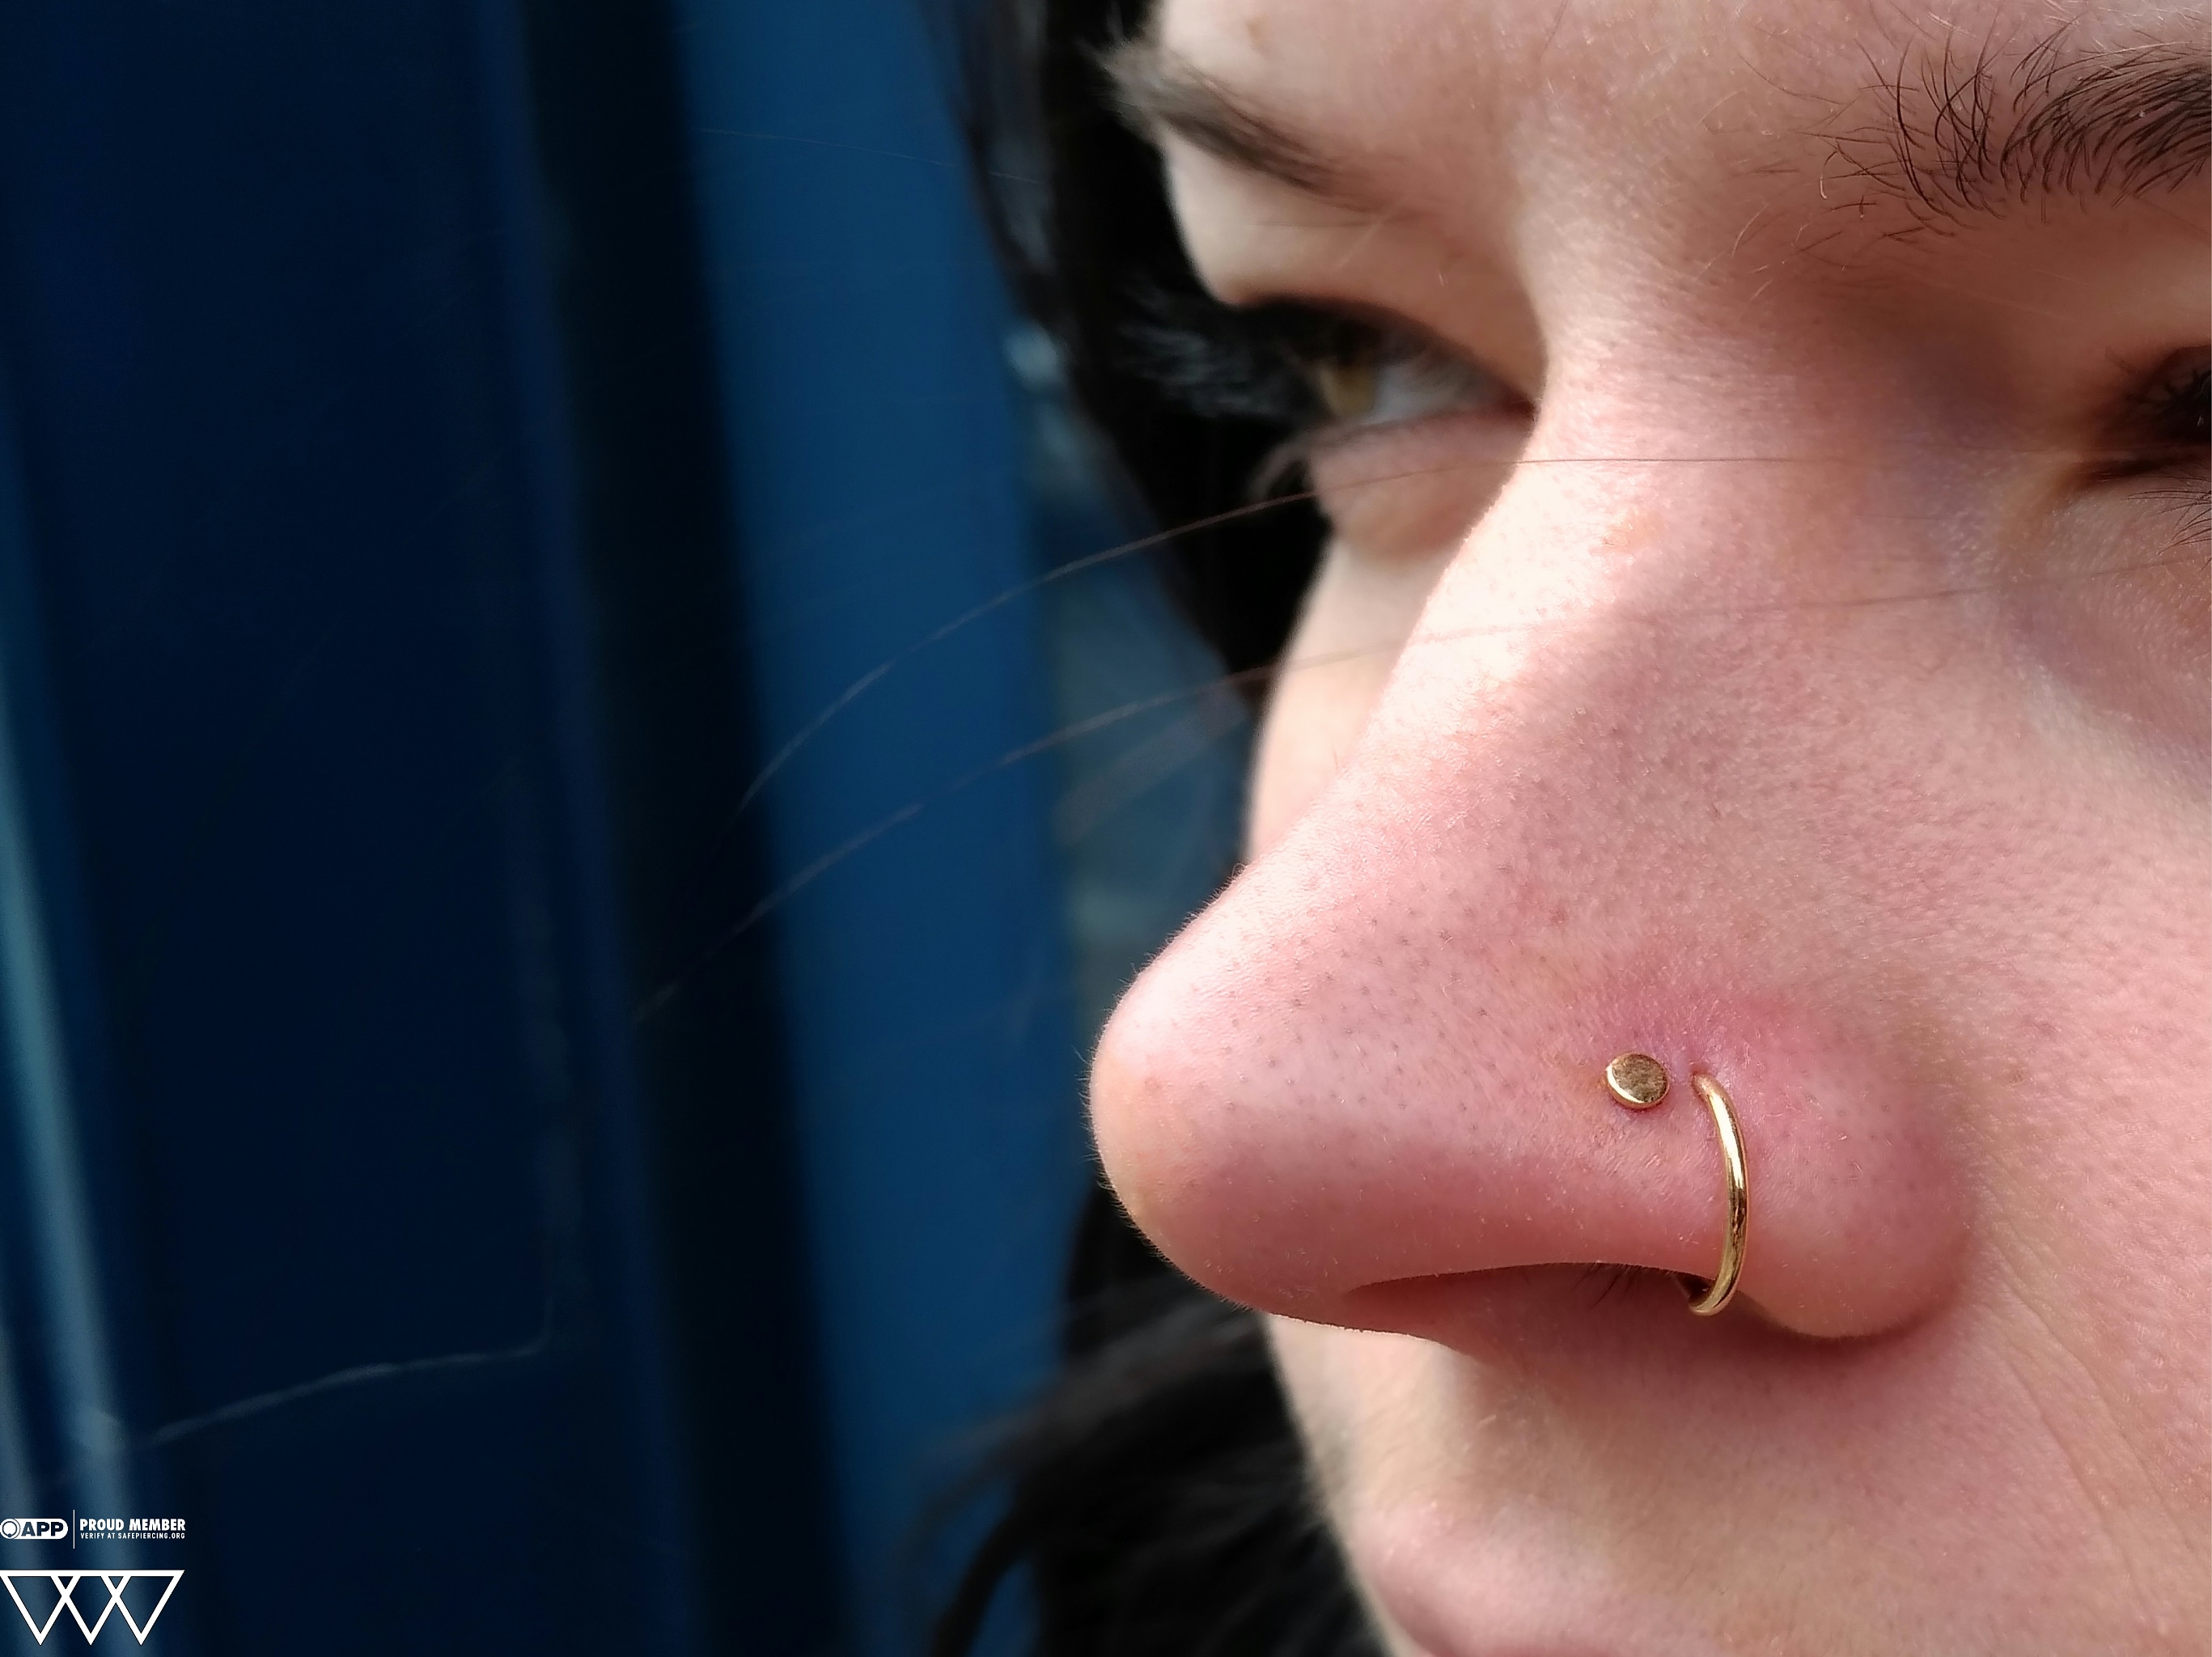 Paired Nostril Piercings